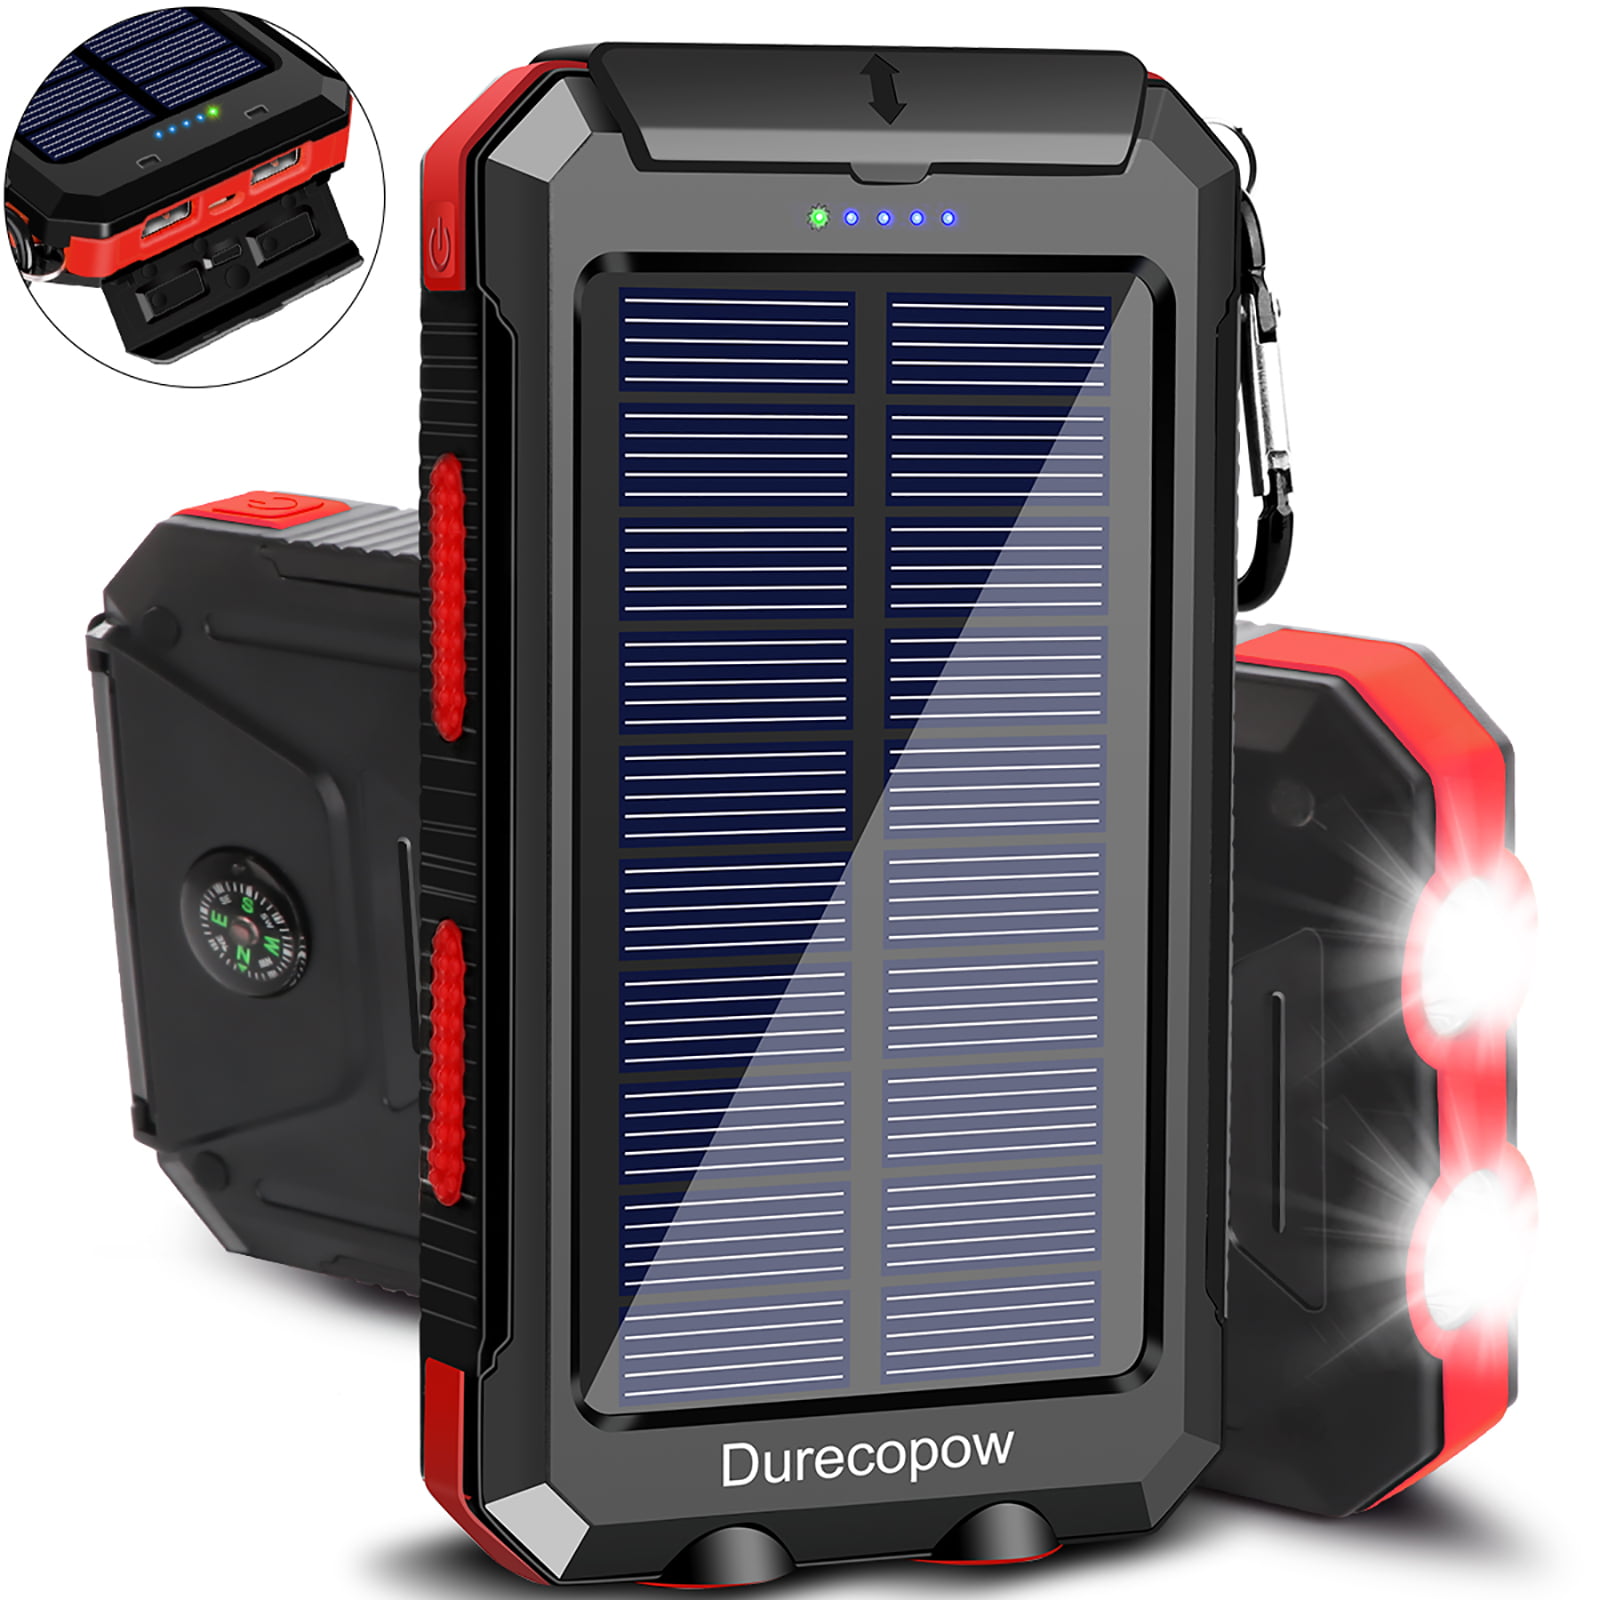 Orange Portable Charger Solar Phone Charger with 2 USB Port 2 LED Light External Battery Pack for Emergency Travelling Camping iPhone Android Cellphone Charging Solar Charger 20000mAh Power Bank 